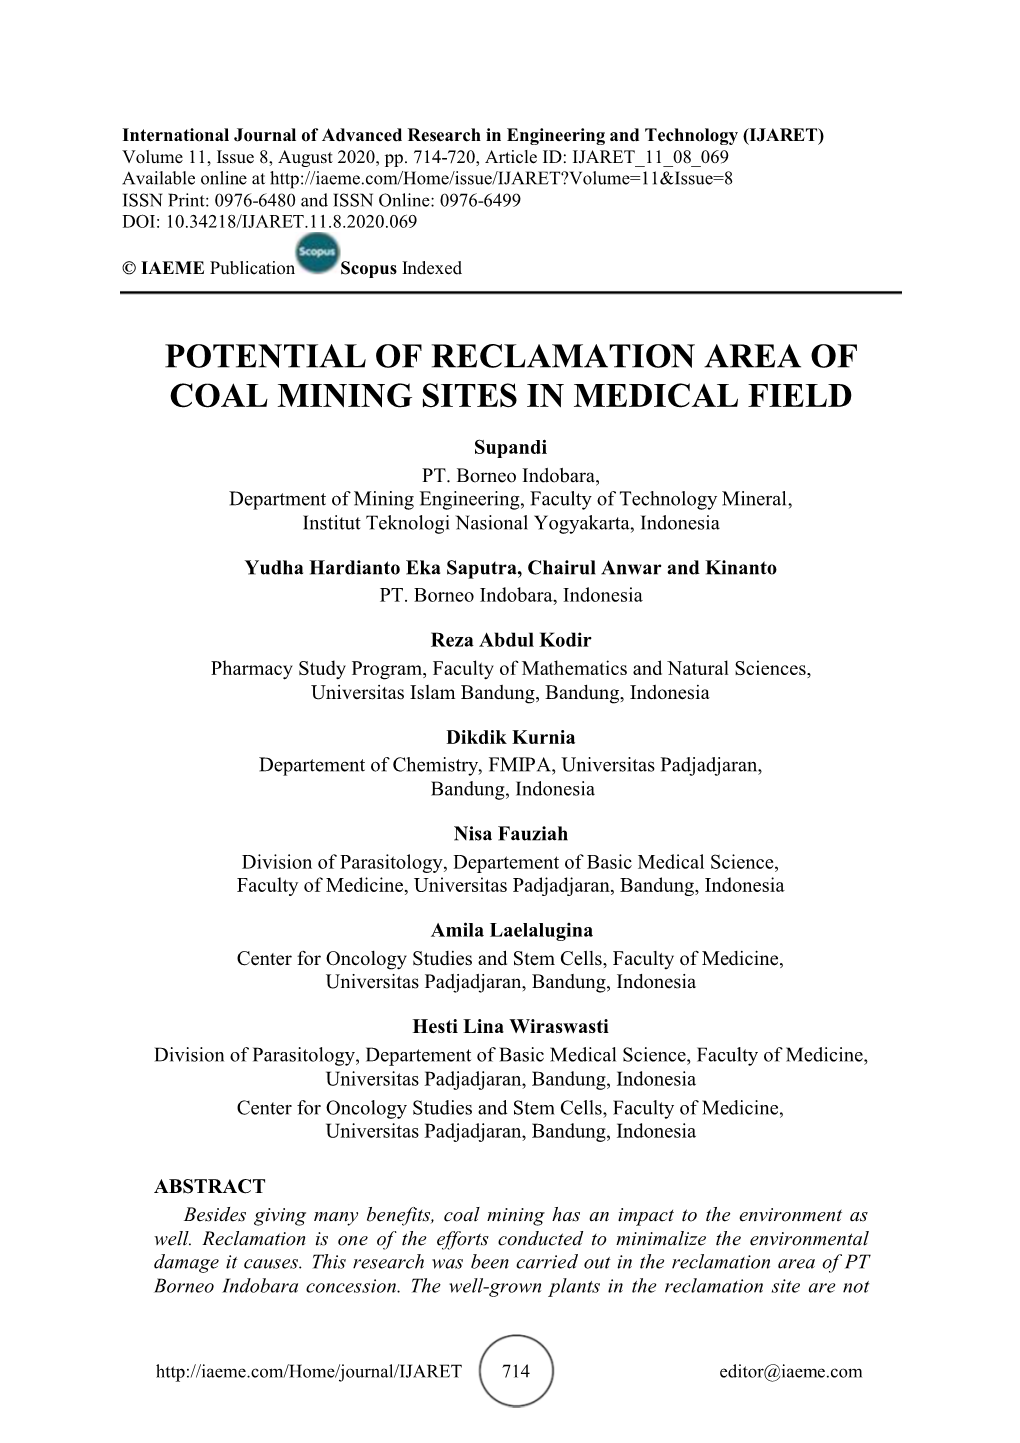 Potential of Clamation Area of Re Coal Mining Sites In